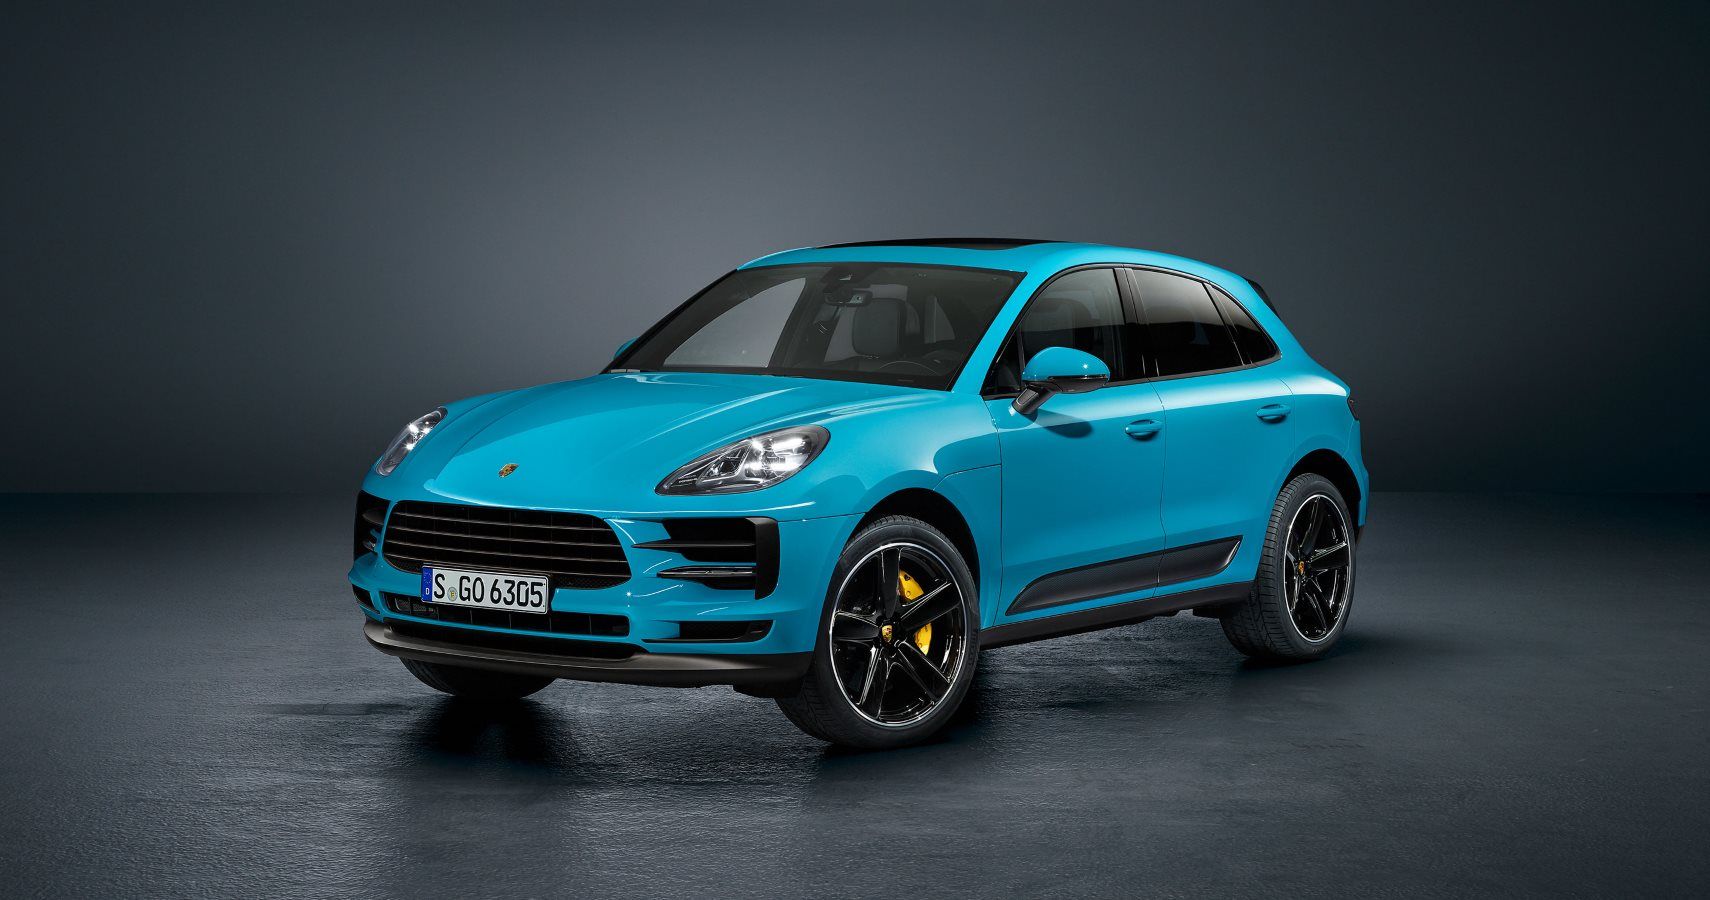 The Refreshed Porsche Macan Has Striking Changes